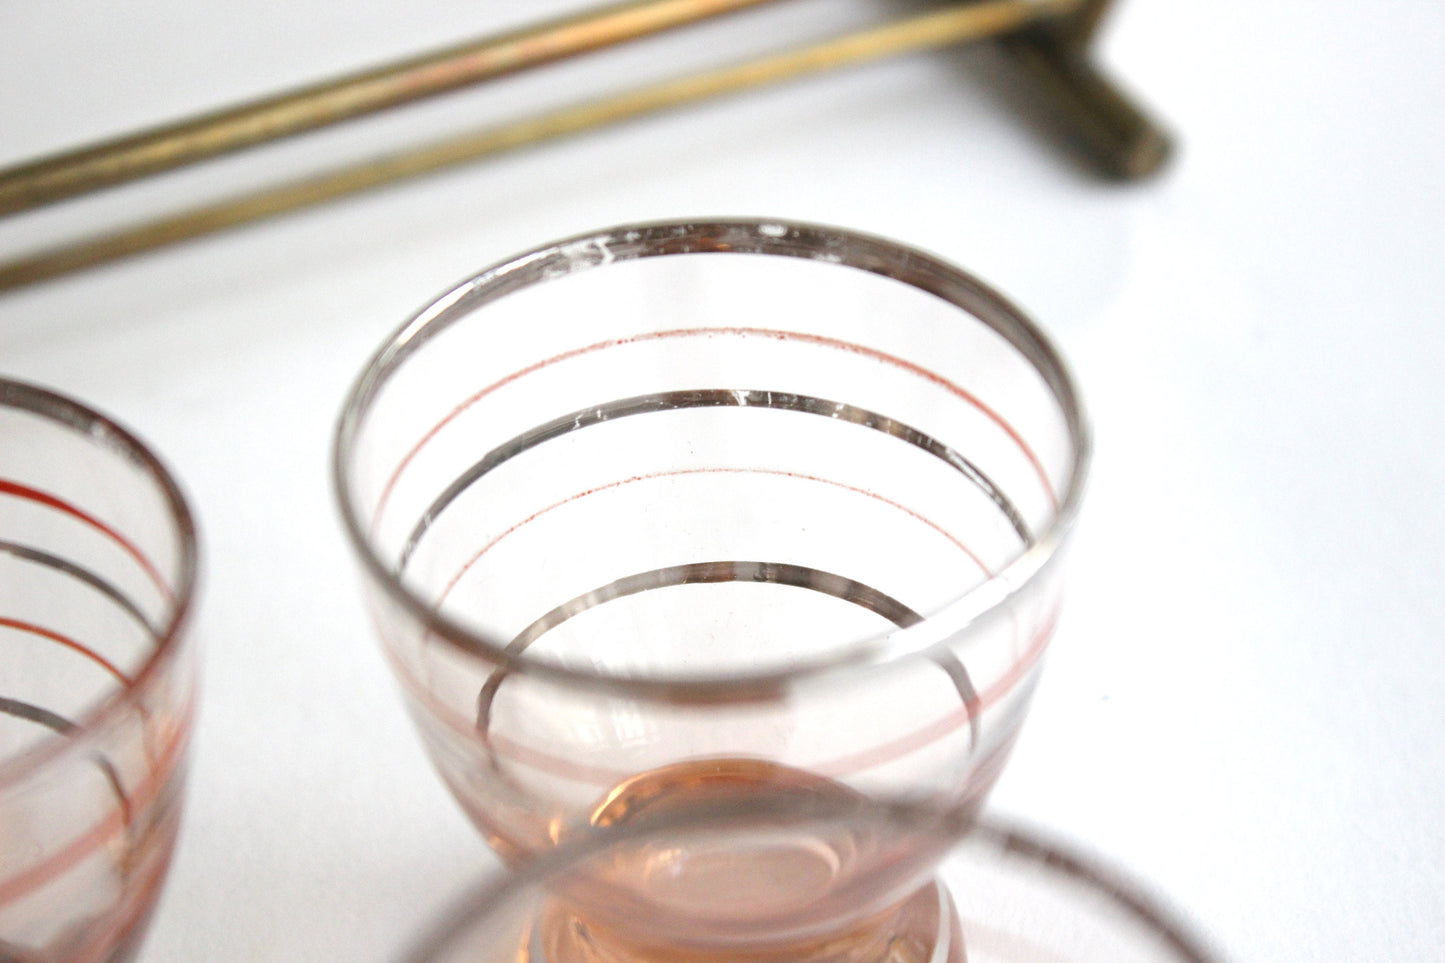 Shot Glass Set of 5 in Brass Holder with bamboo handle 1950s. Mid-Century design. Austria